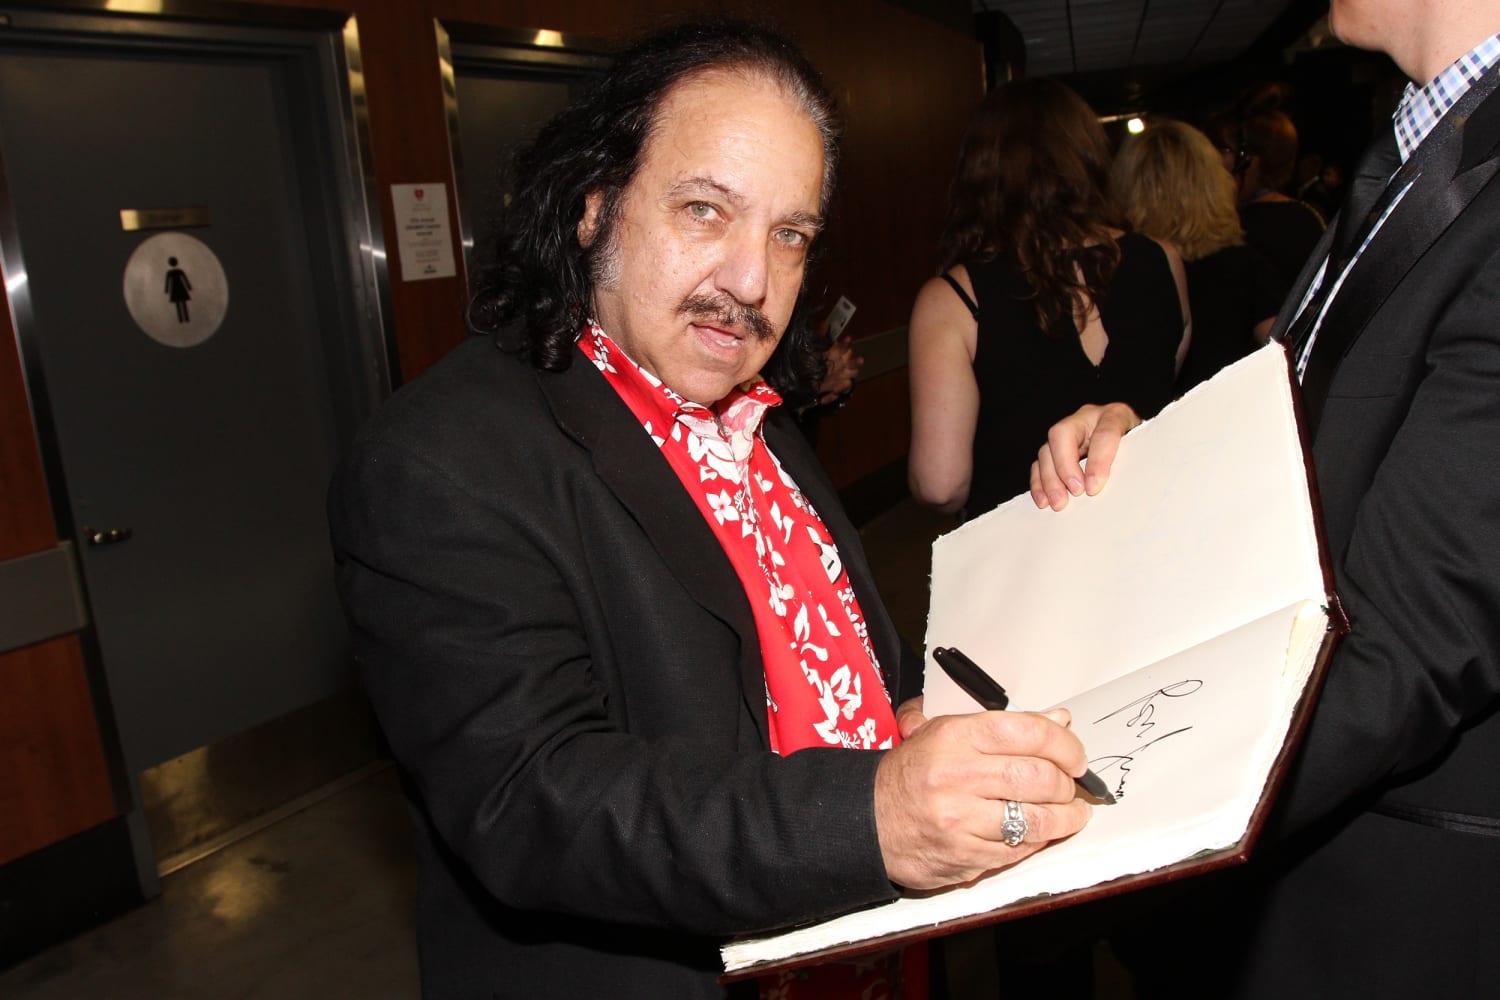 Xxx Video Rape Full - Porn actor Ron Jeremy charged with rape, sexual assault